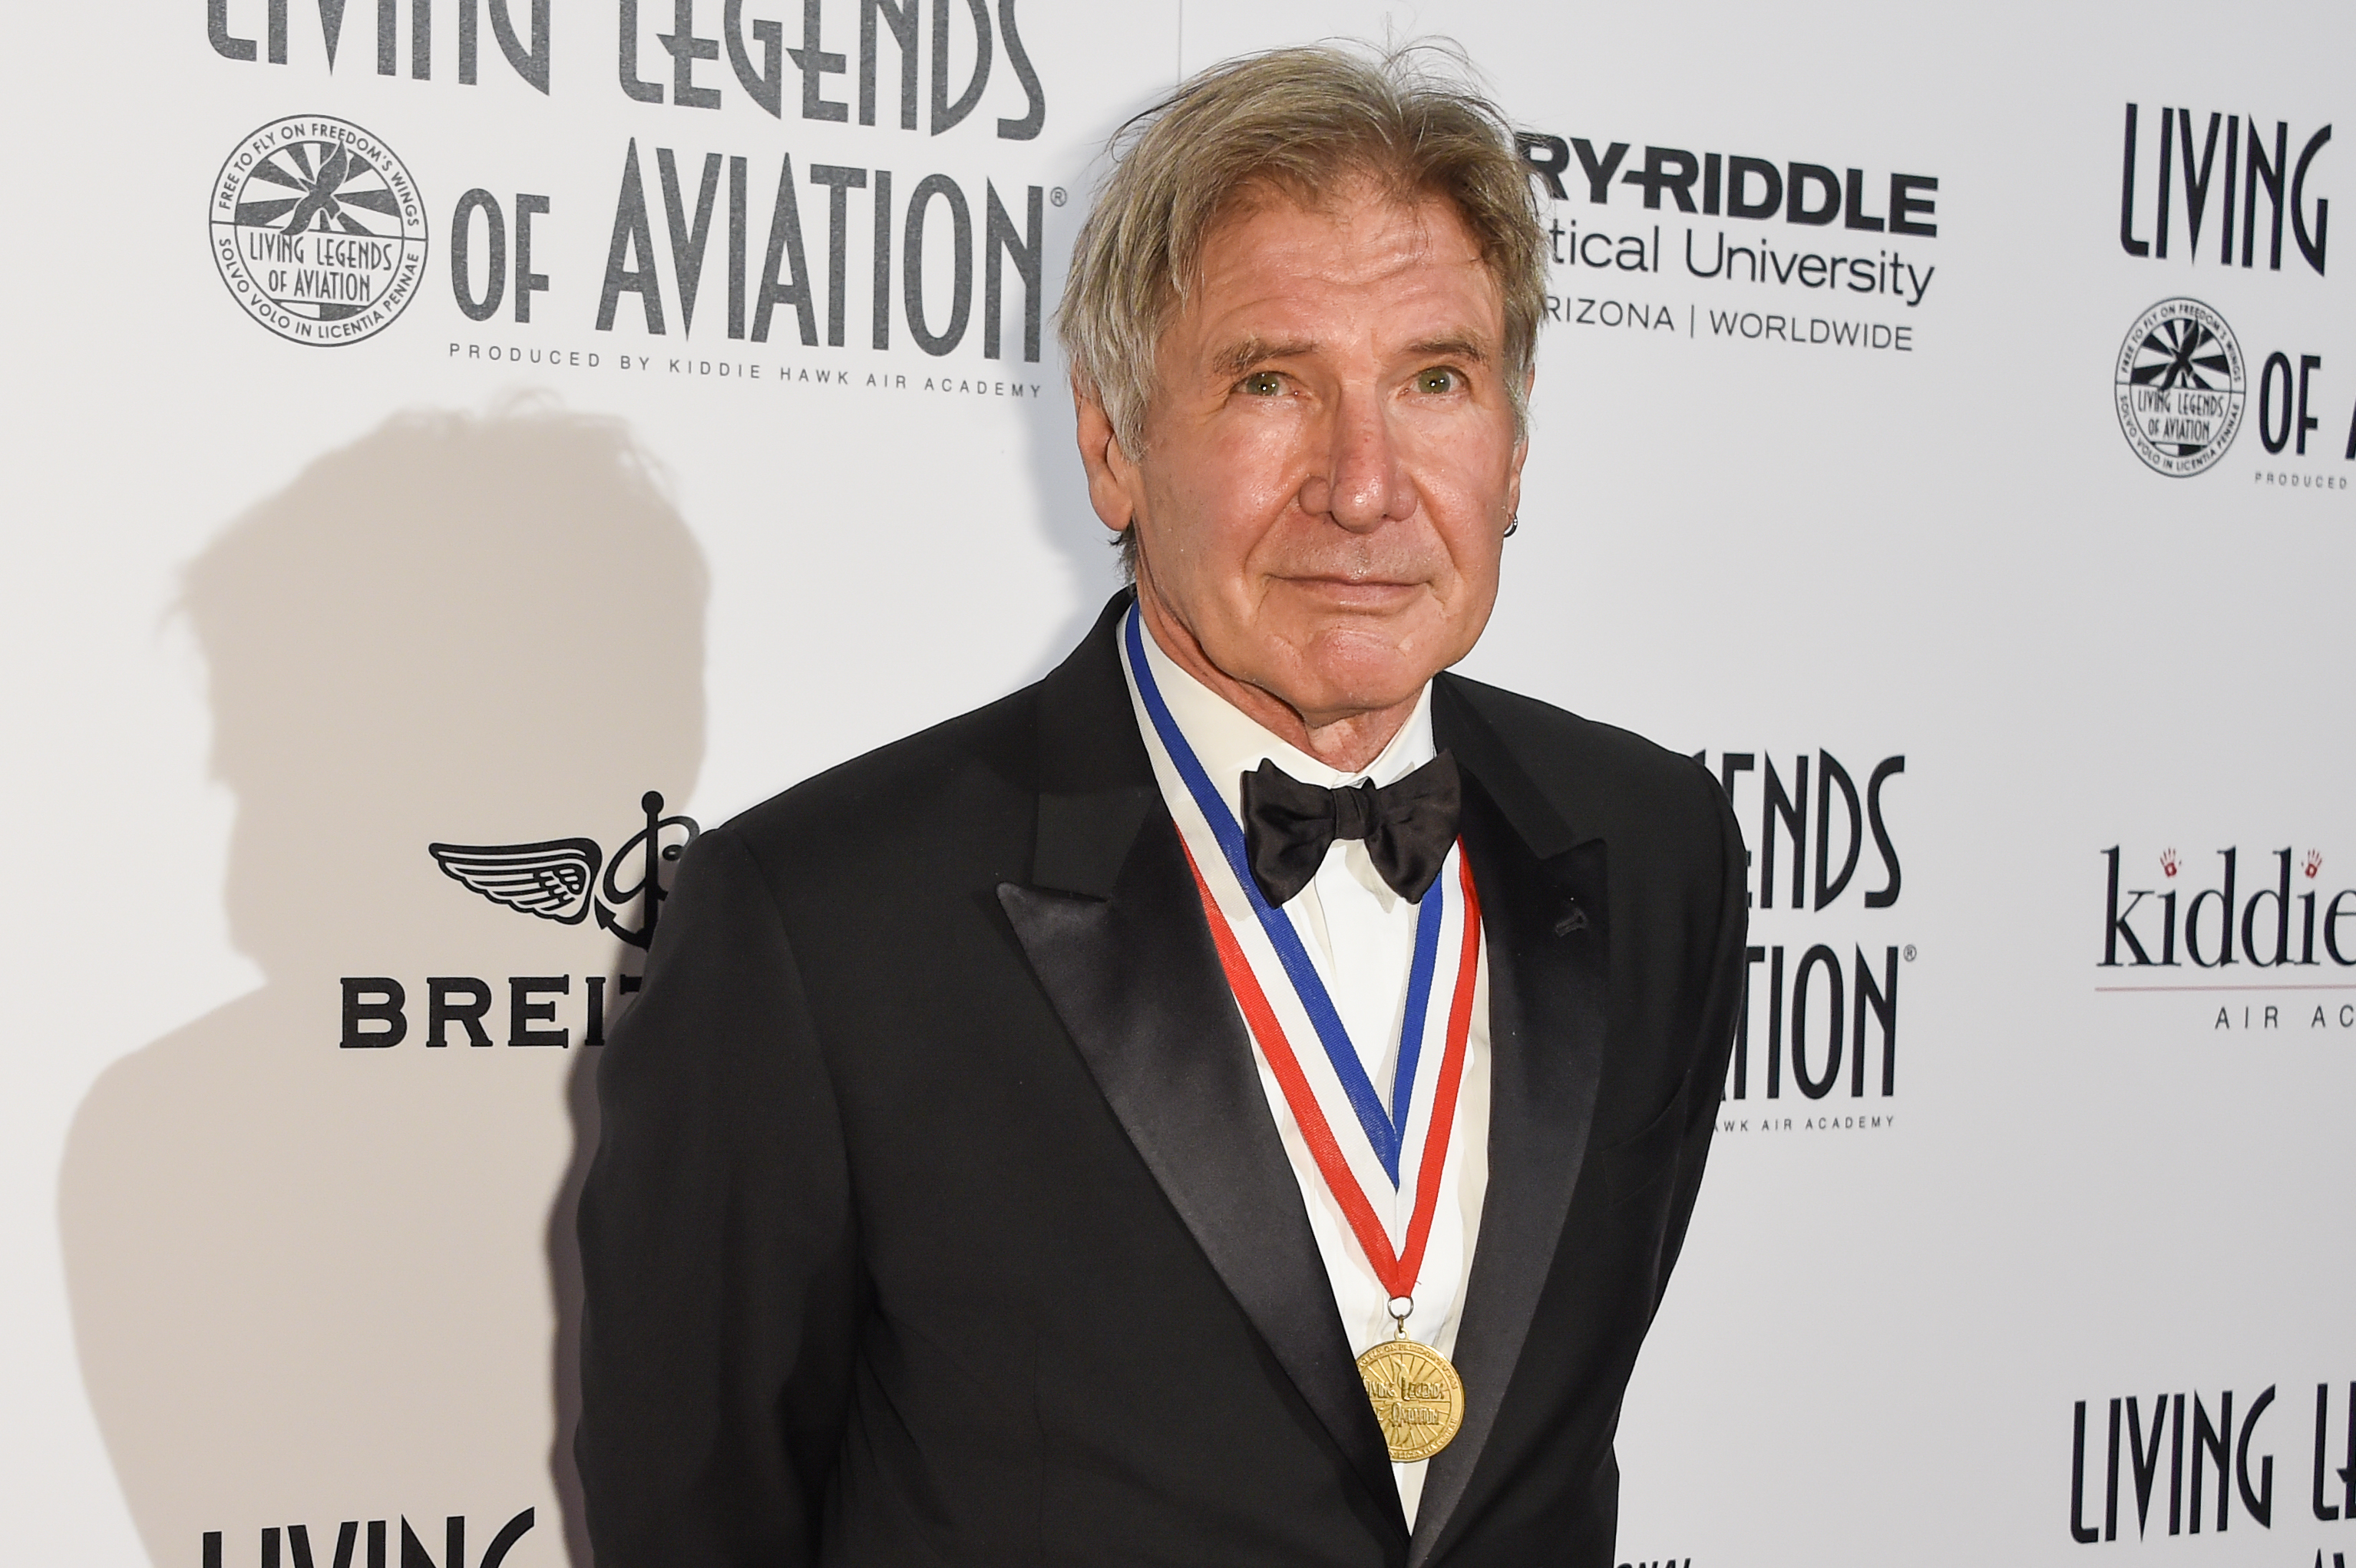 Harrison Ford attends the 12th Annual Living Legends of Aviation Awards at The Beverly Hilton Hotel on Friday, Jan 16, 2015, in Los Angeles (Rob Latour—Invision/AP)